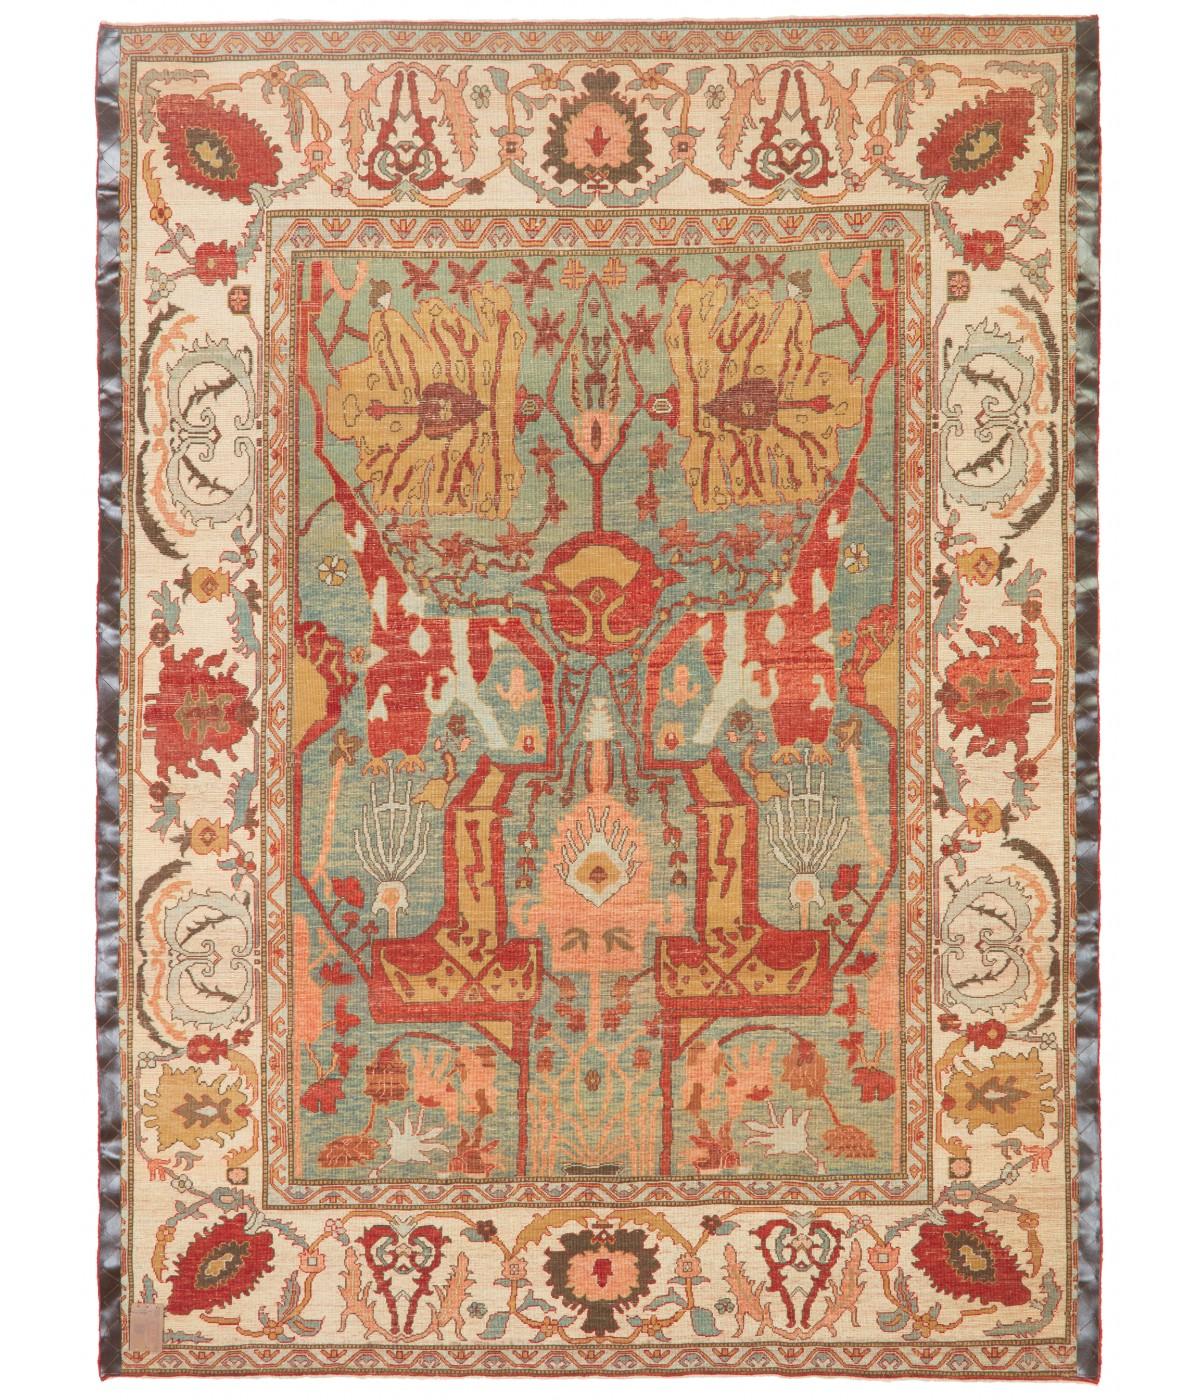 The source of the rug comes from the book Islamic Carpets, Joseph V. McMullan, Near Eastern Art Research Center Inc., New York 1965 nr.22. This is a system of arabesque-designed 19th-century rugs from Gerous ( Garrus or Garus ) region, Eastern